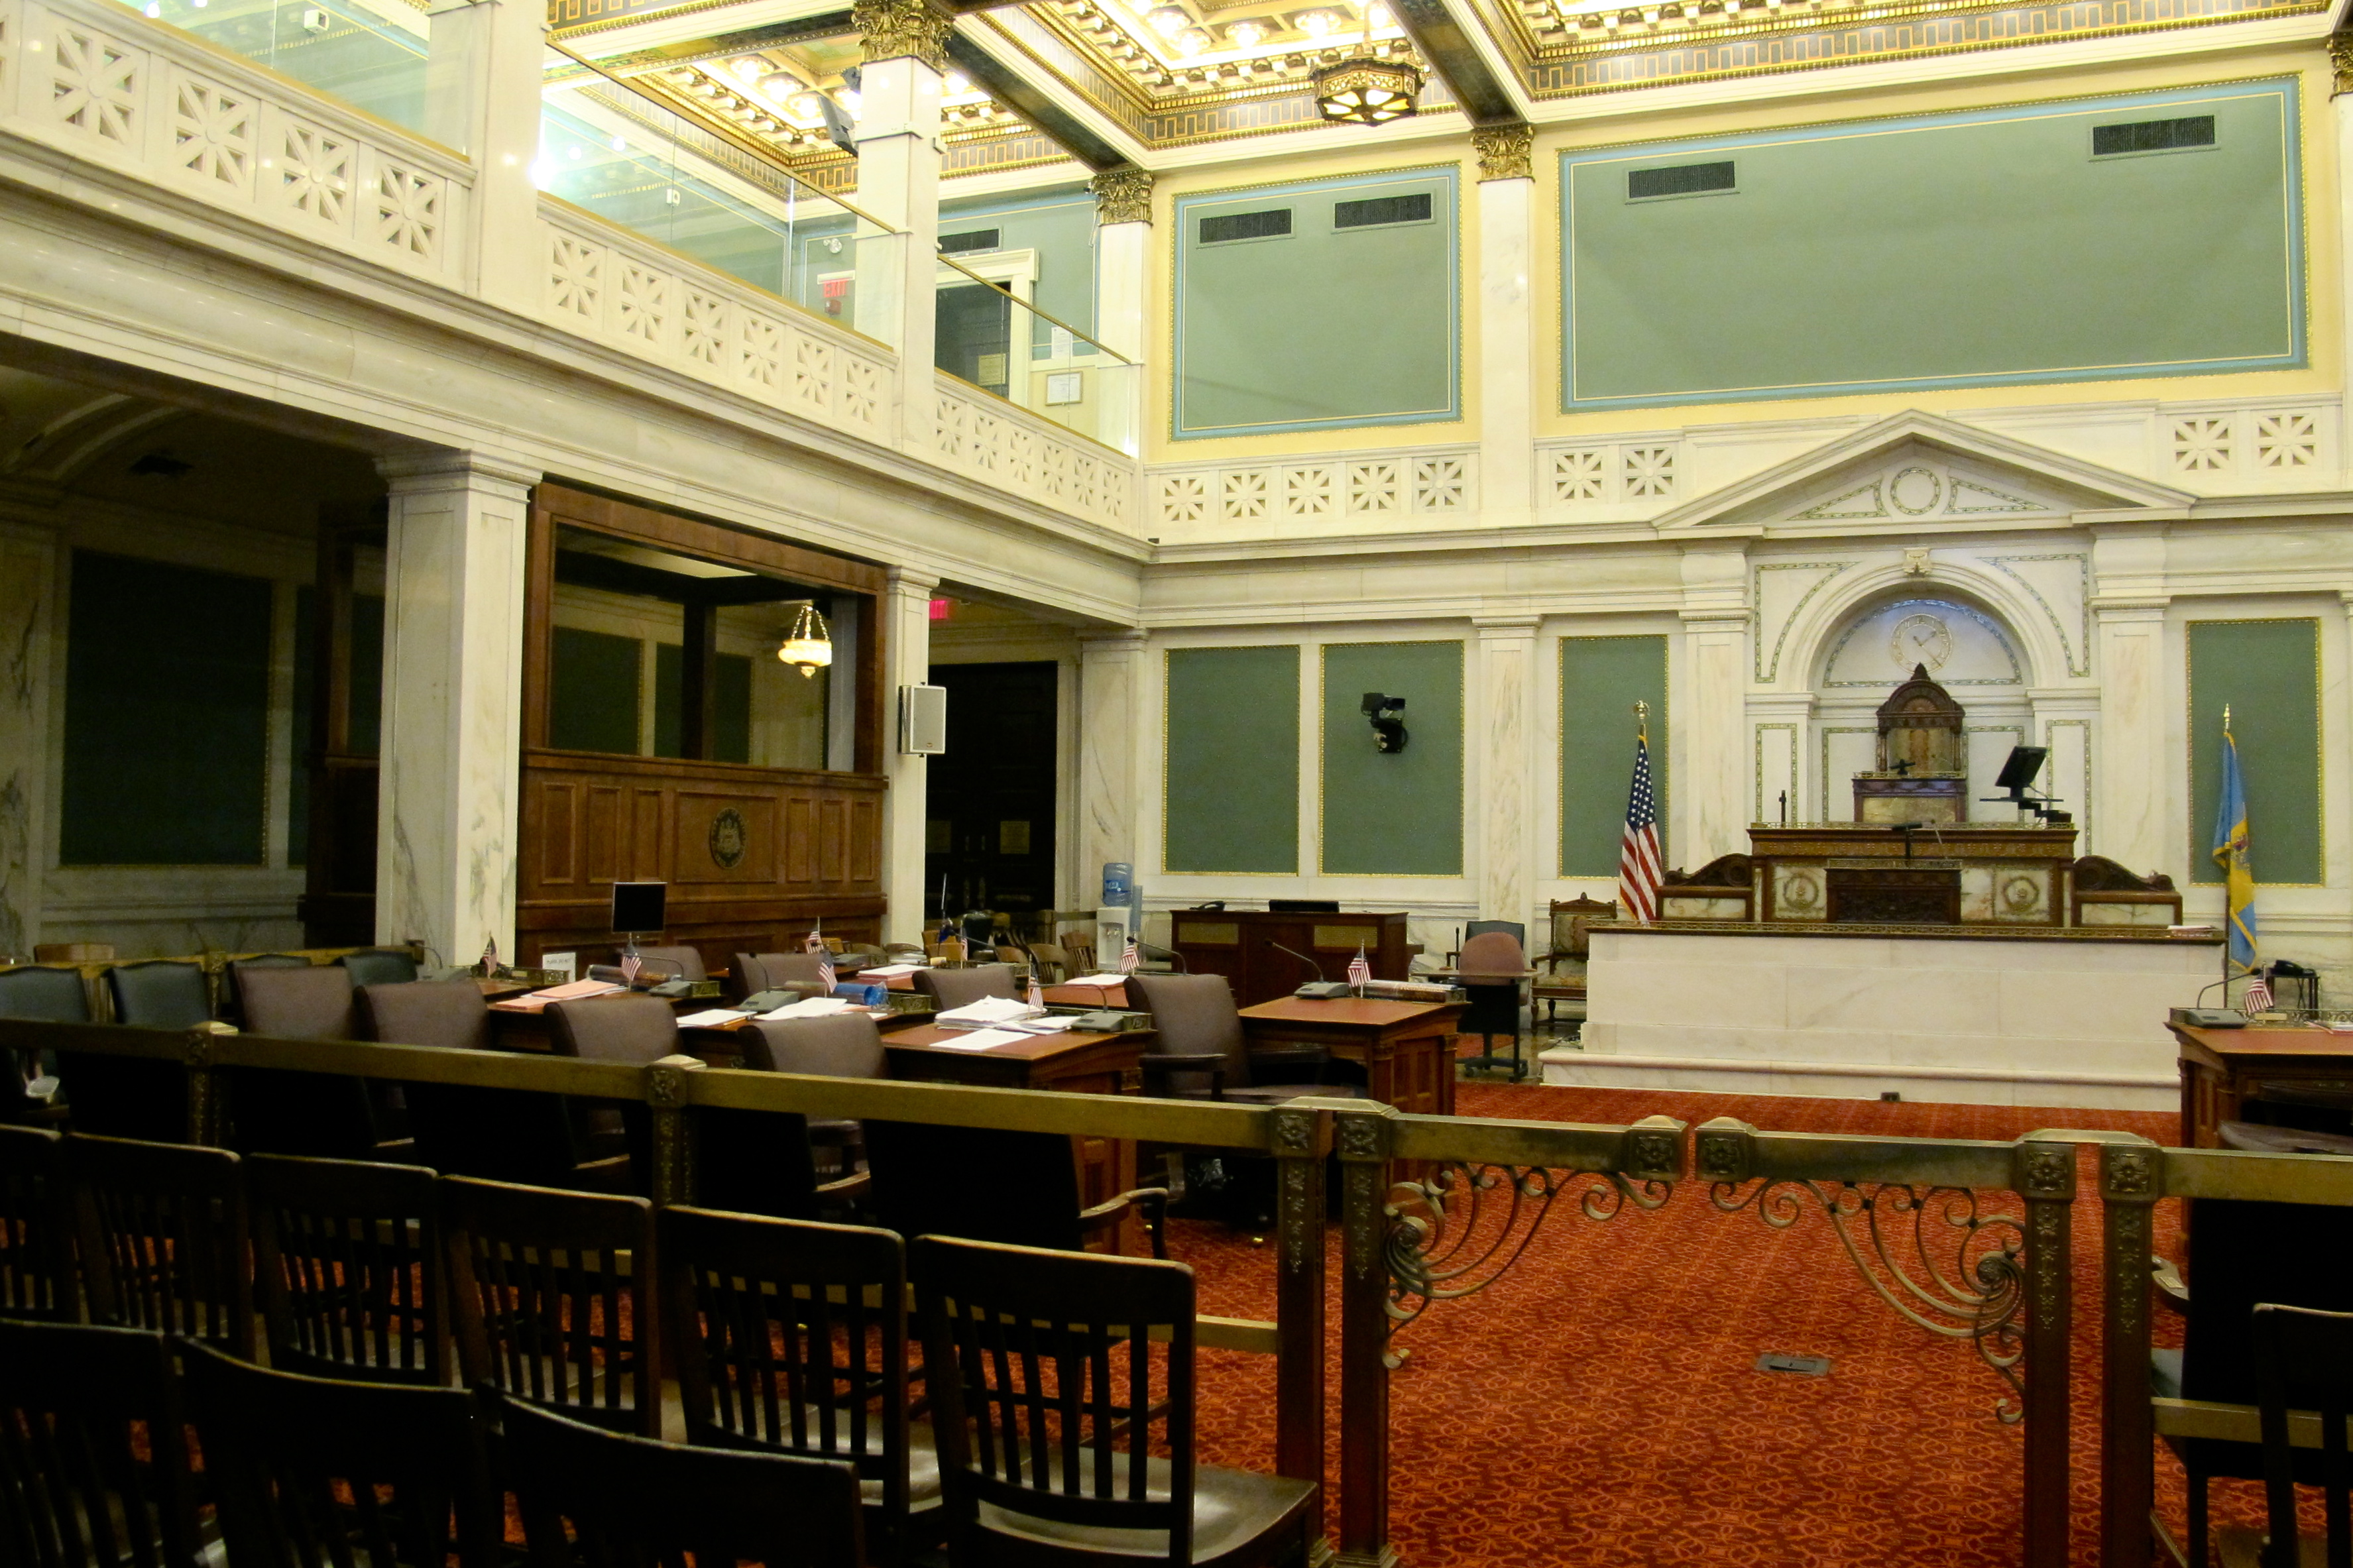 The City Council's chambers.